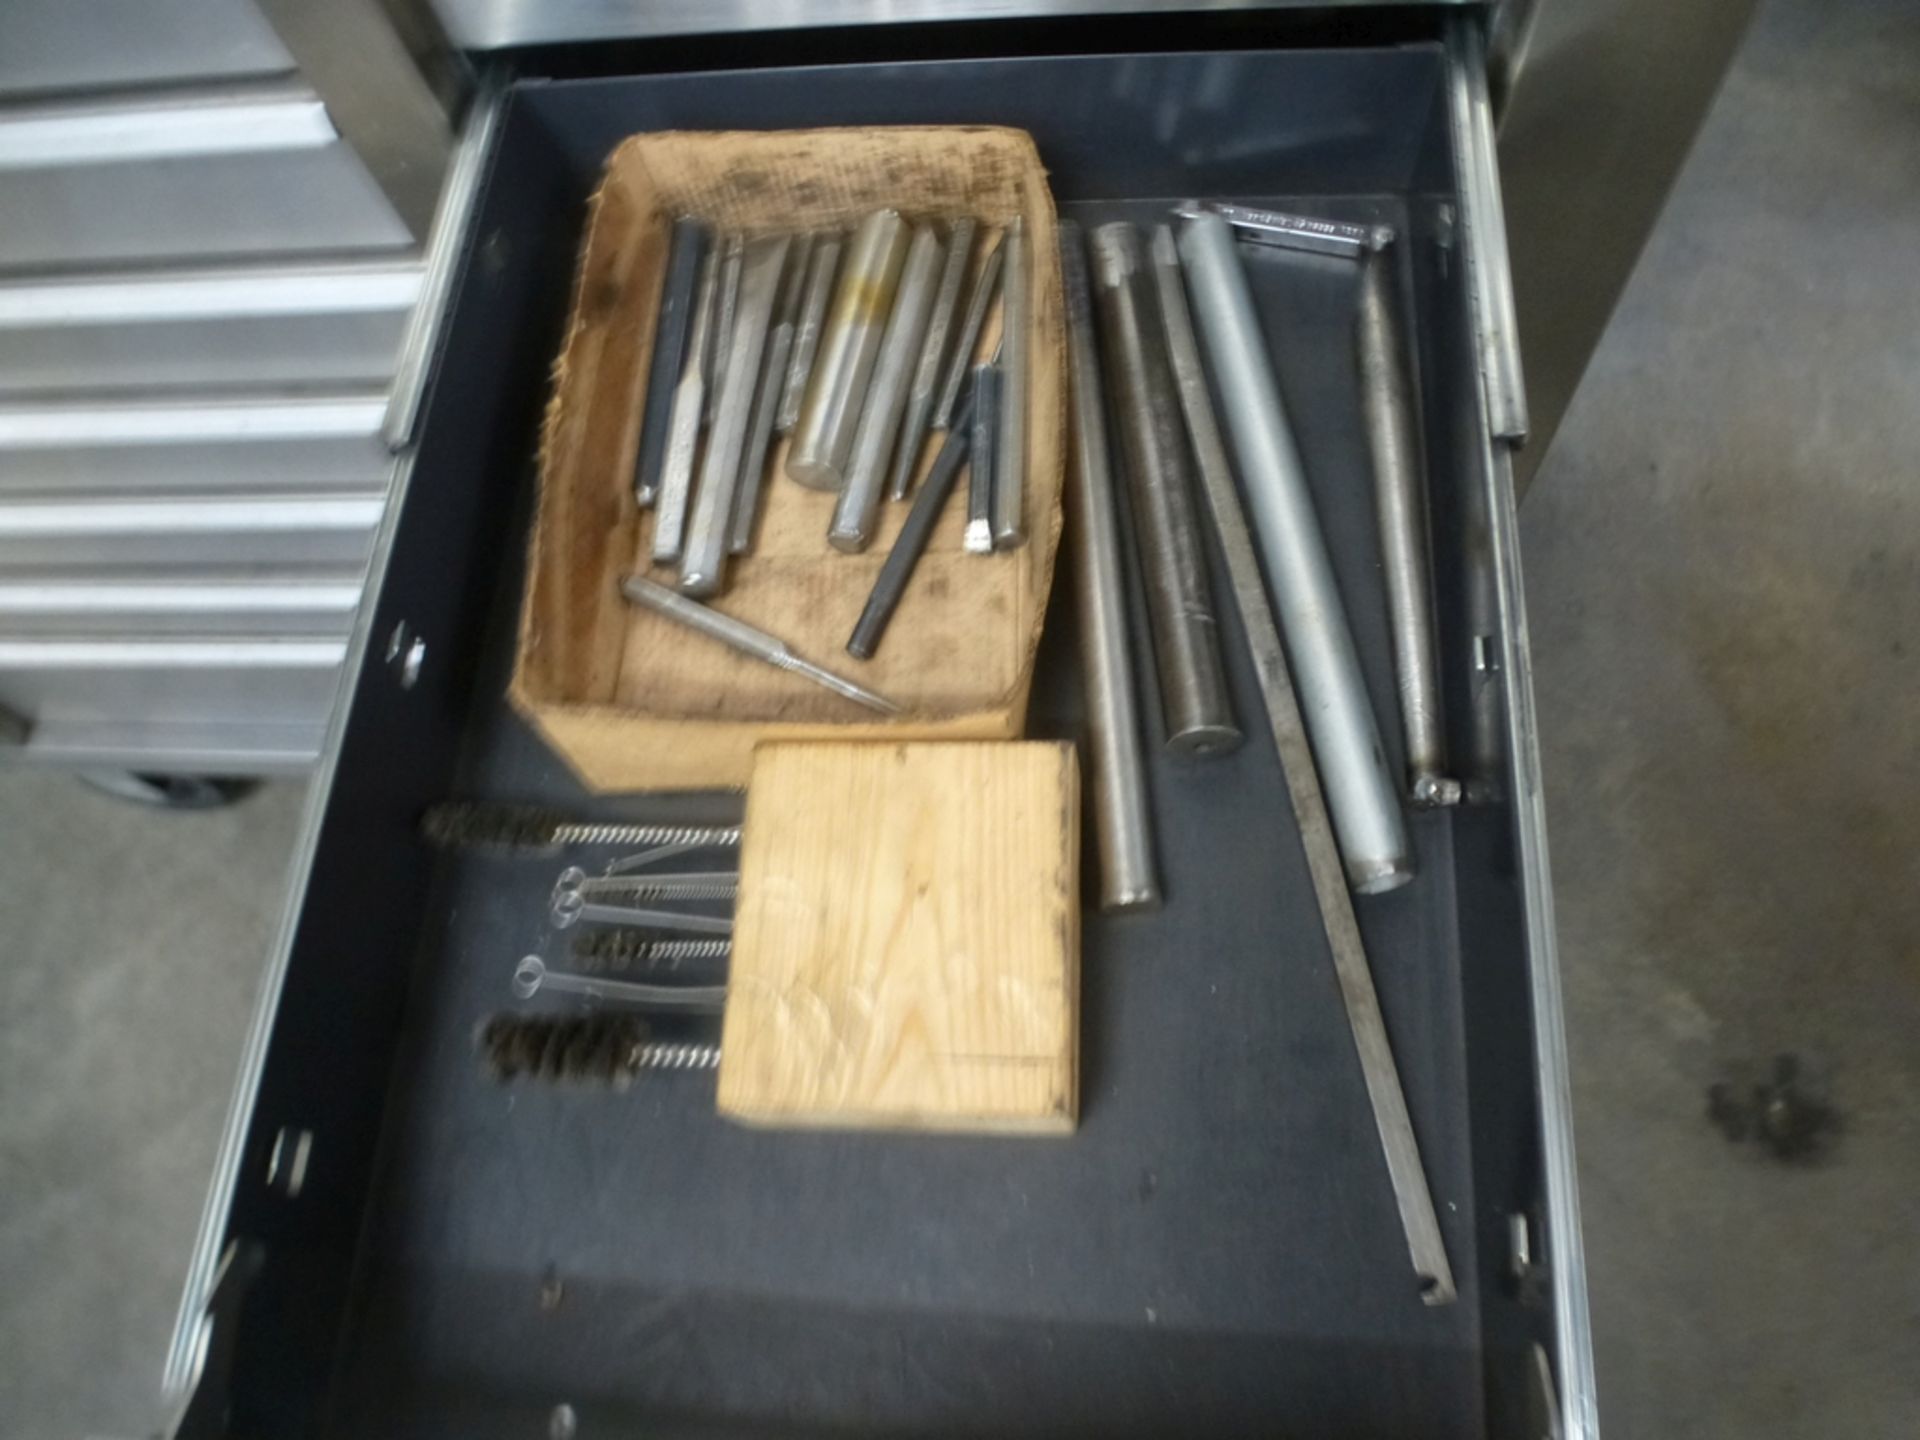 Toolbox w/ Tremendous Amount of Tools - North Spartanburg, SC - Image 18 of 31